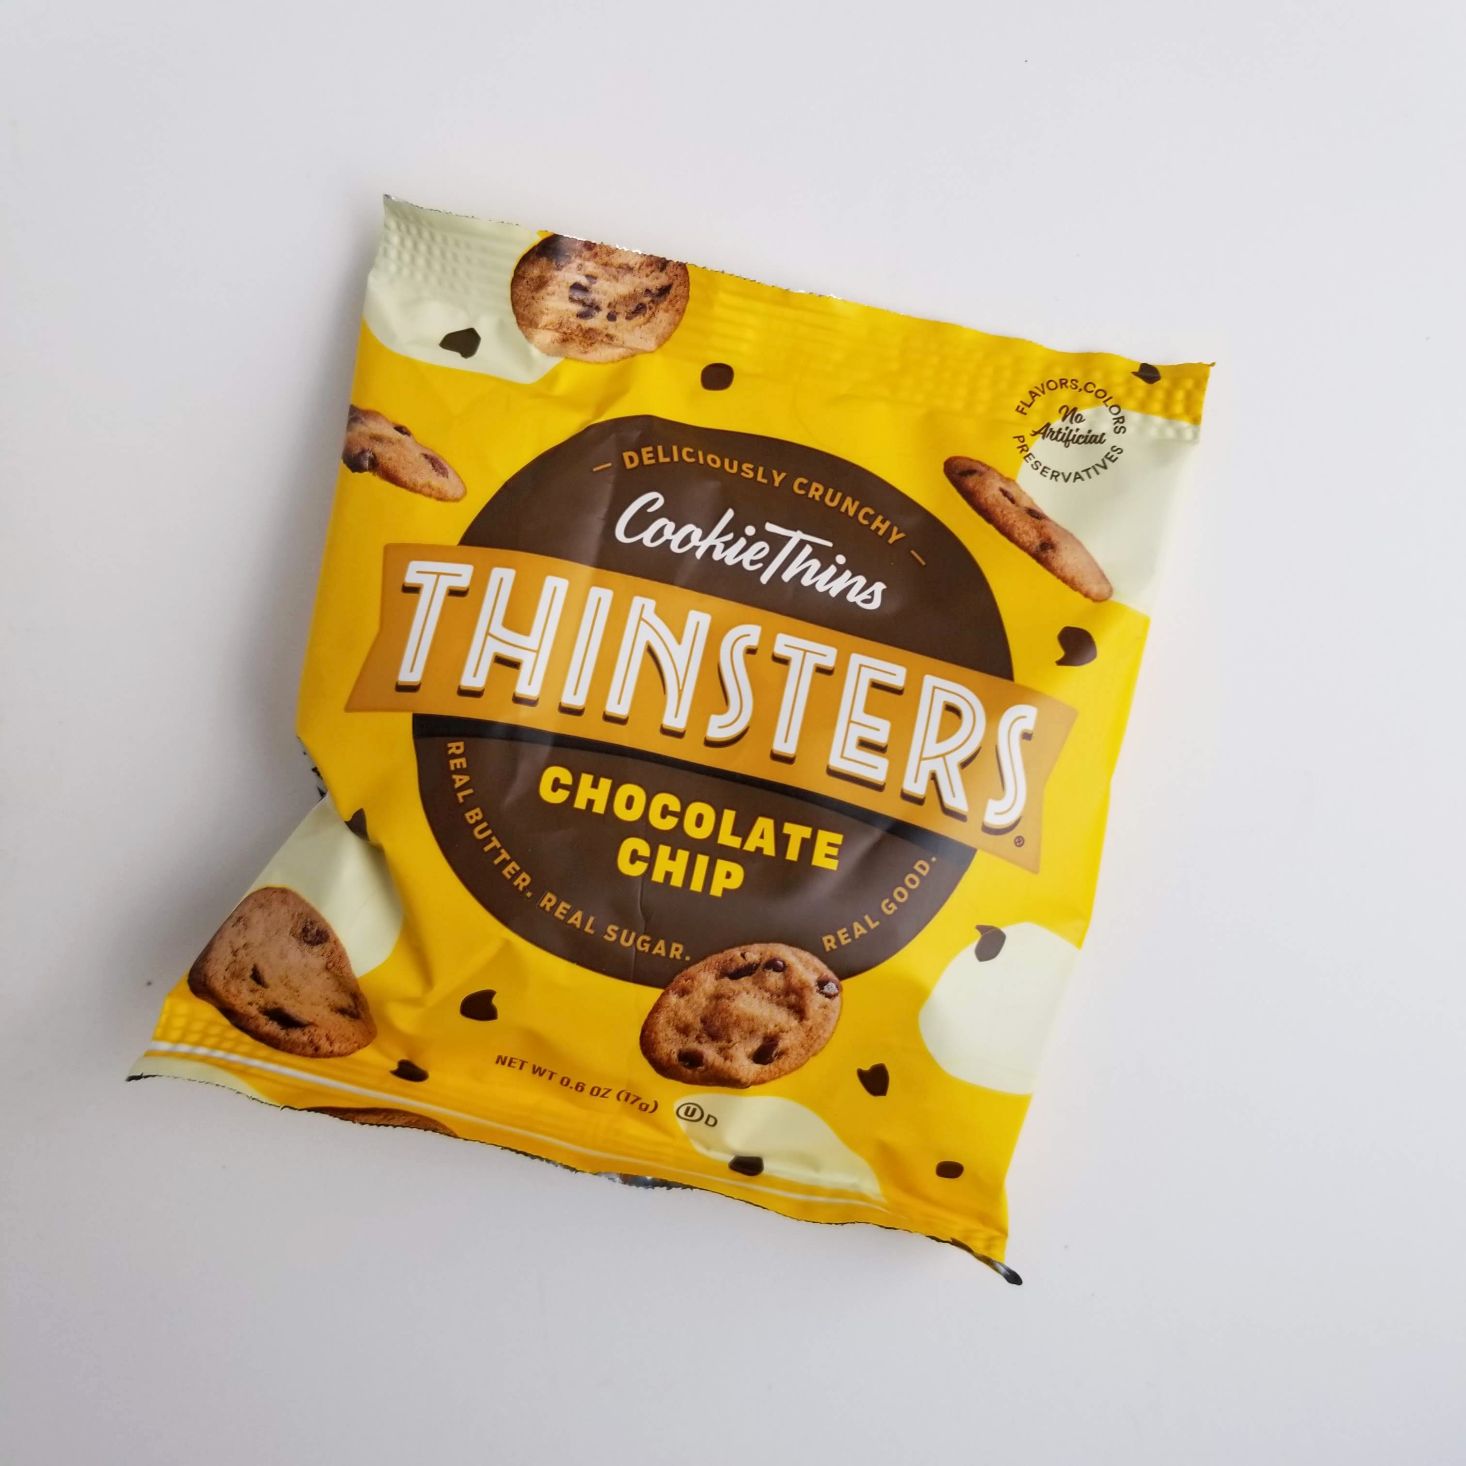 Snack Nation January 2020 thinsters cookies